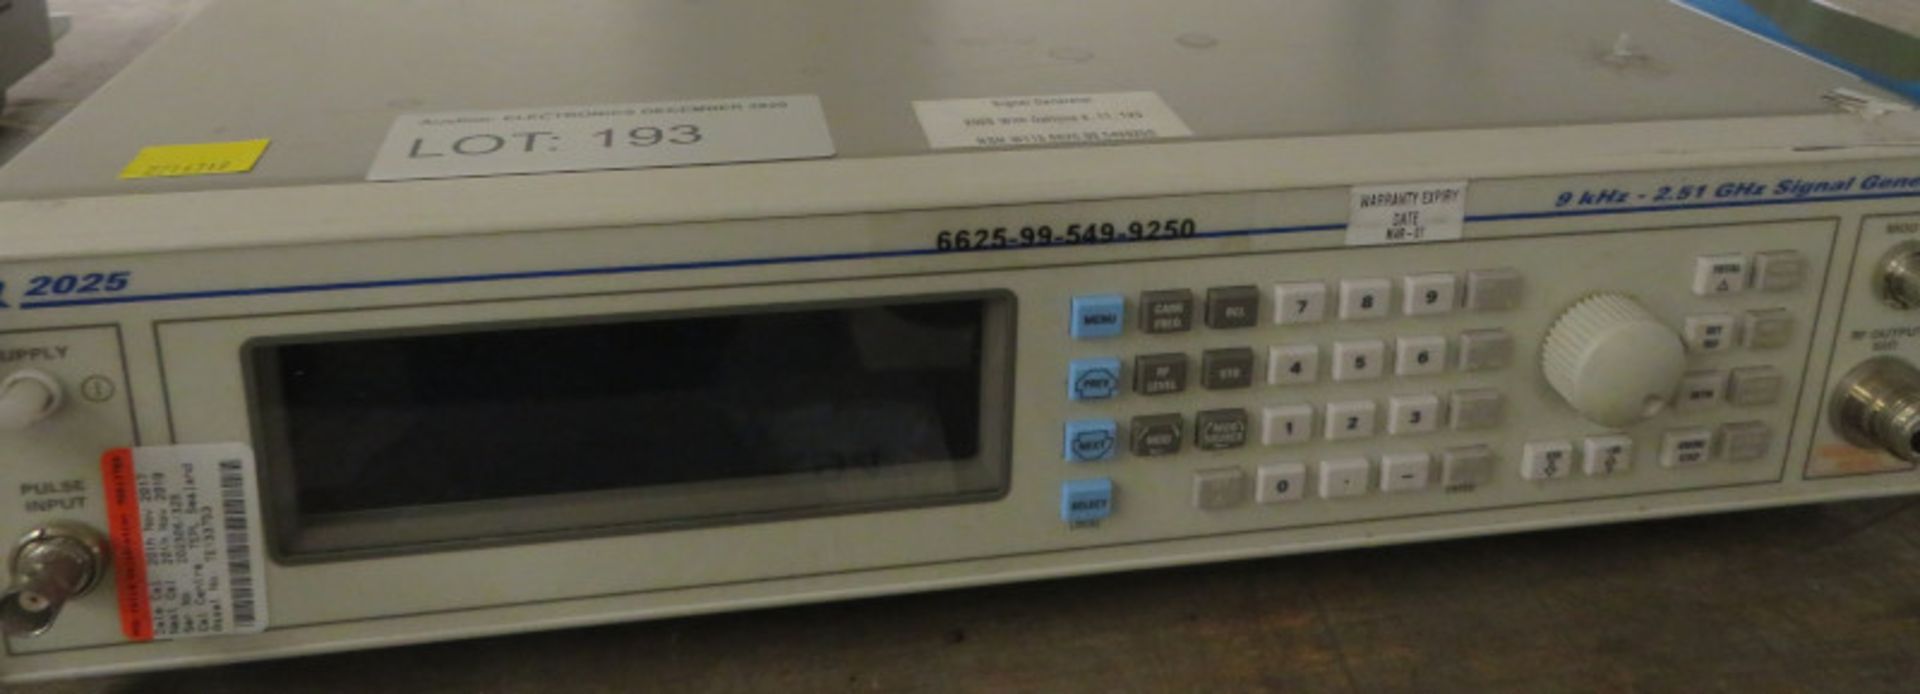 IFR 2025 9kHz - 2.51GHz Signal Generator (No Power Cable) - Image 3 of 4